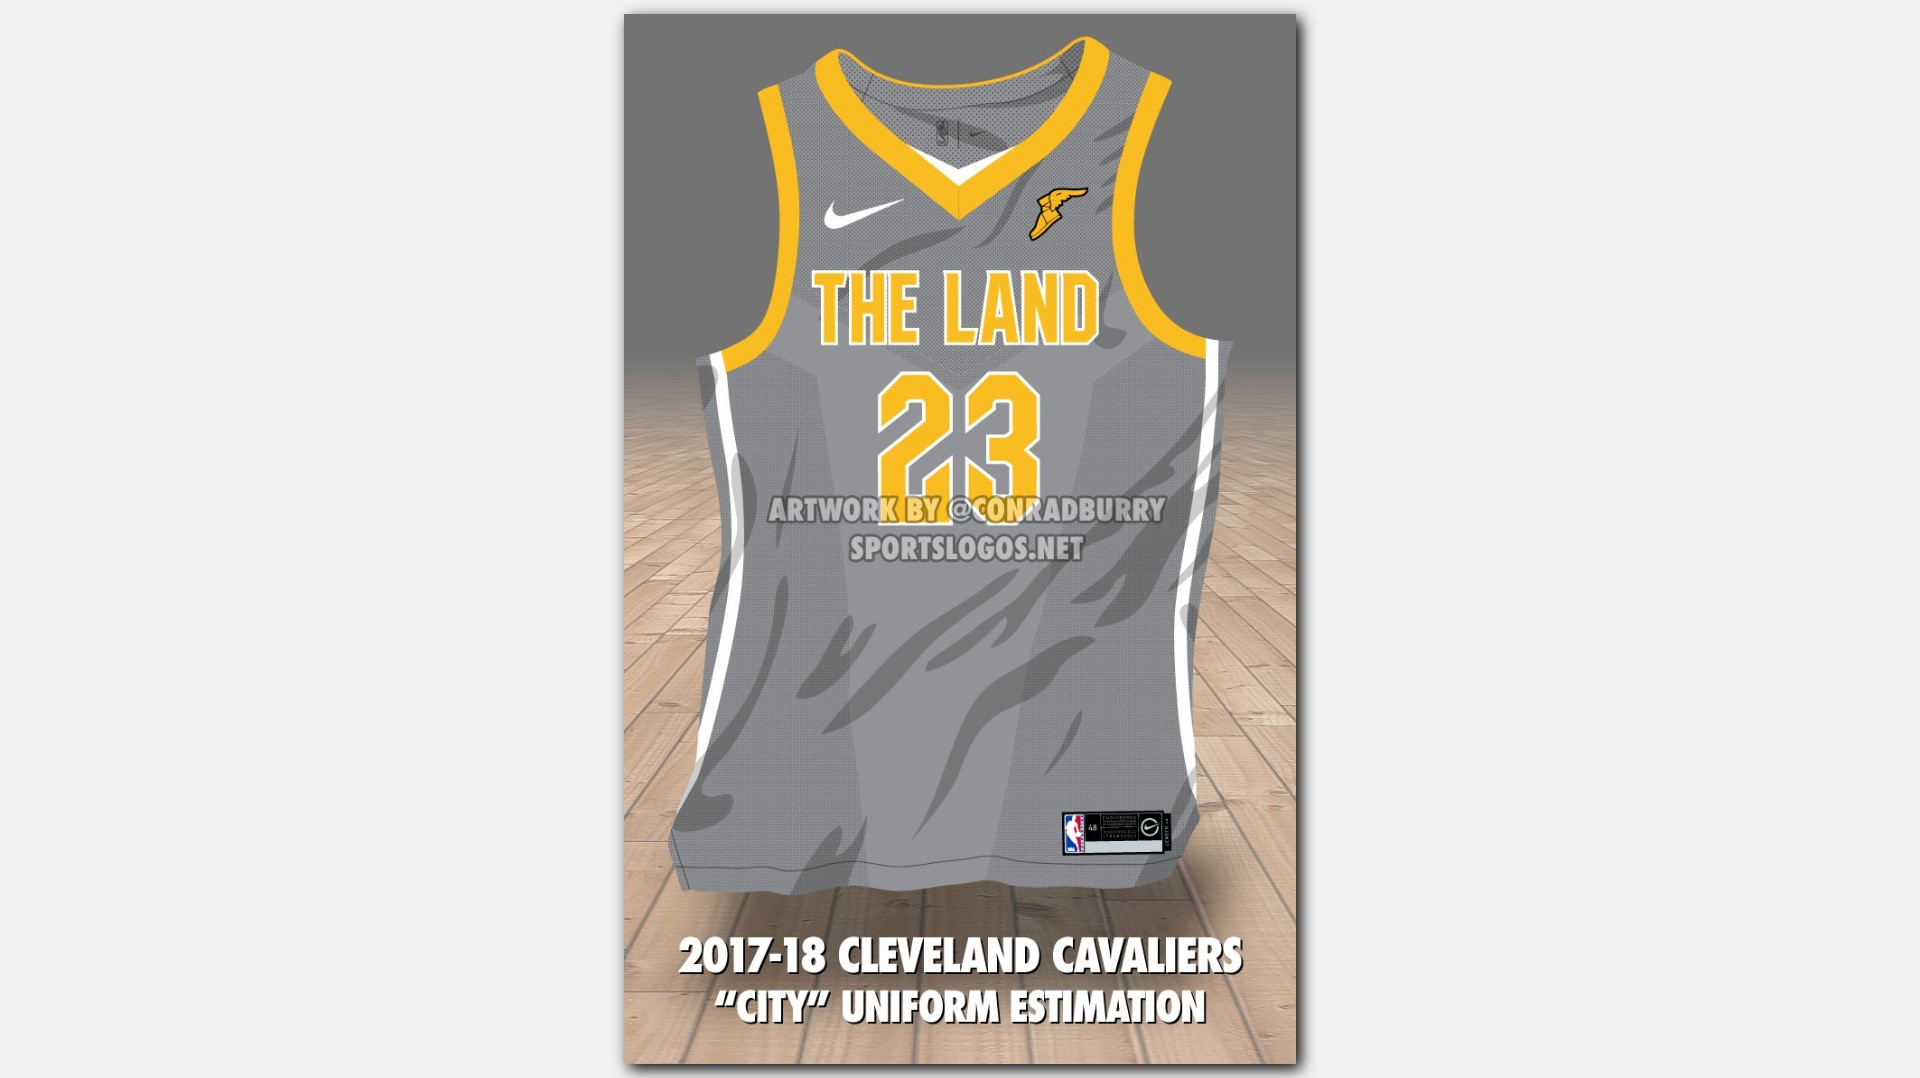 First look at new Cleveland Cavaliers' Nike 'The Land' jersey leaks online